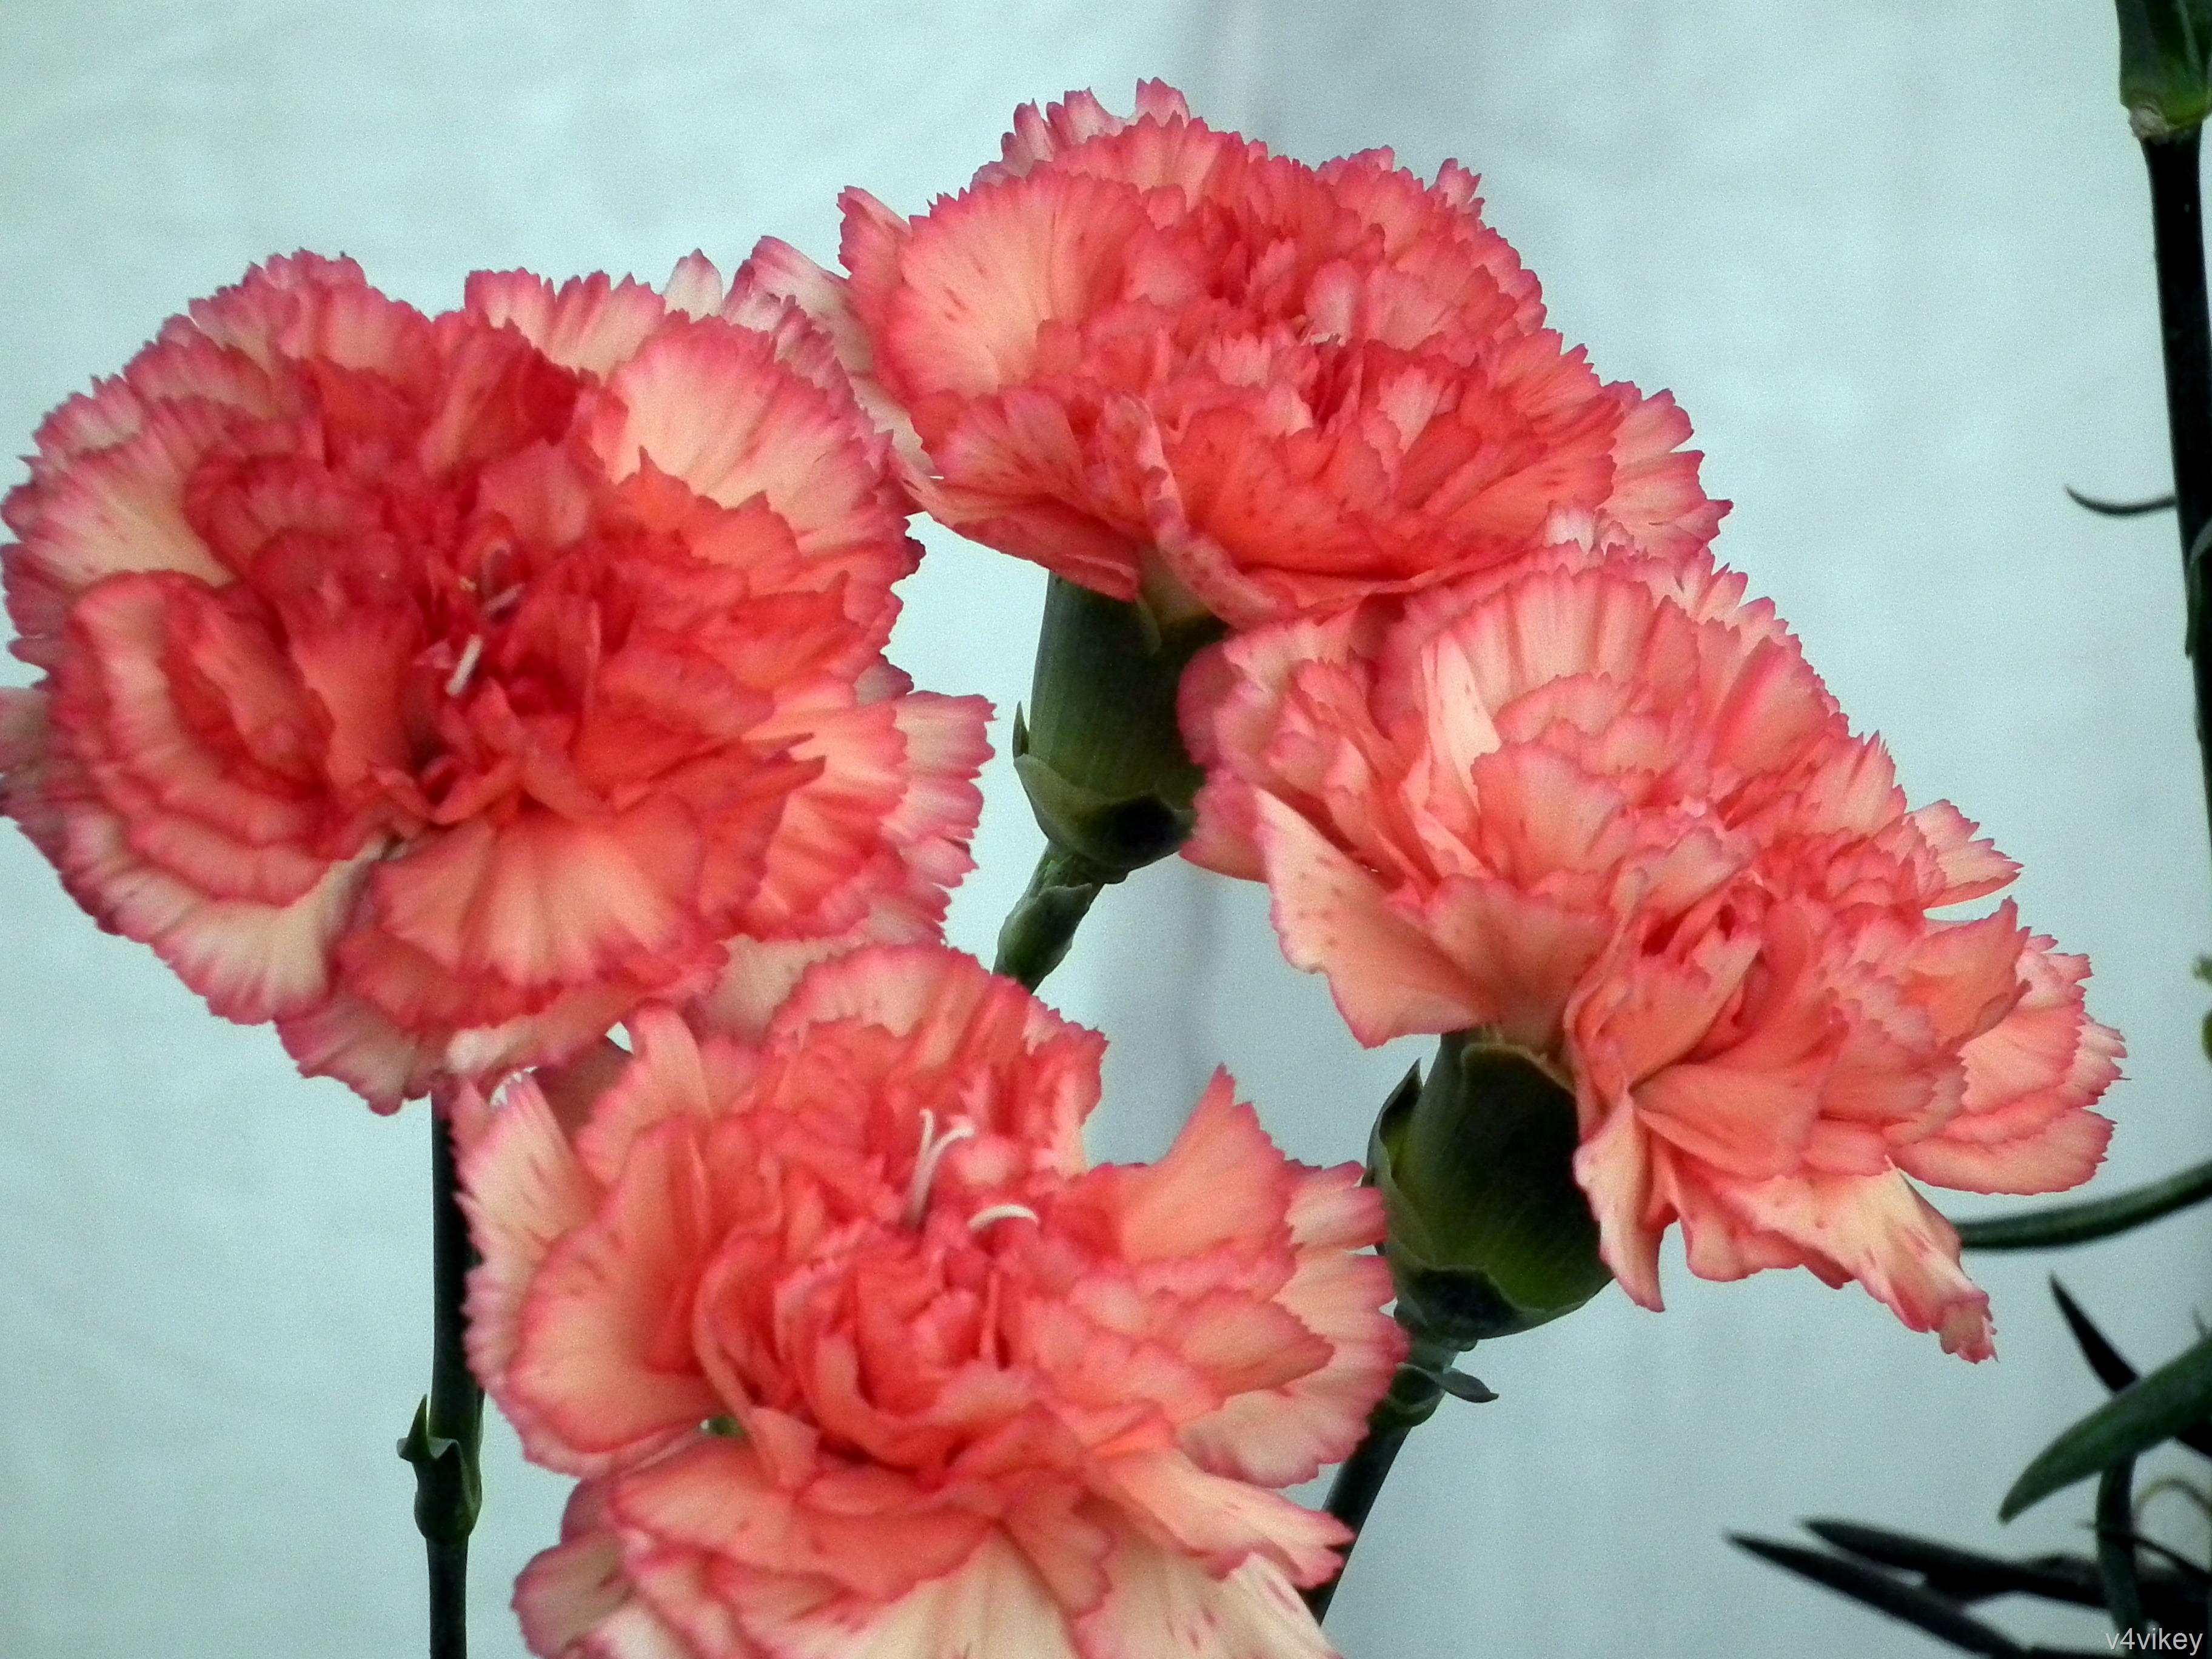 Apricot Color Carnation Flowers - Peach Colored Carnations , HD Wallpaper & Backgrounds